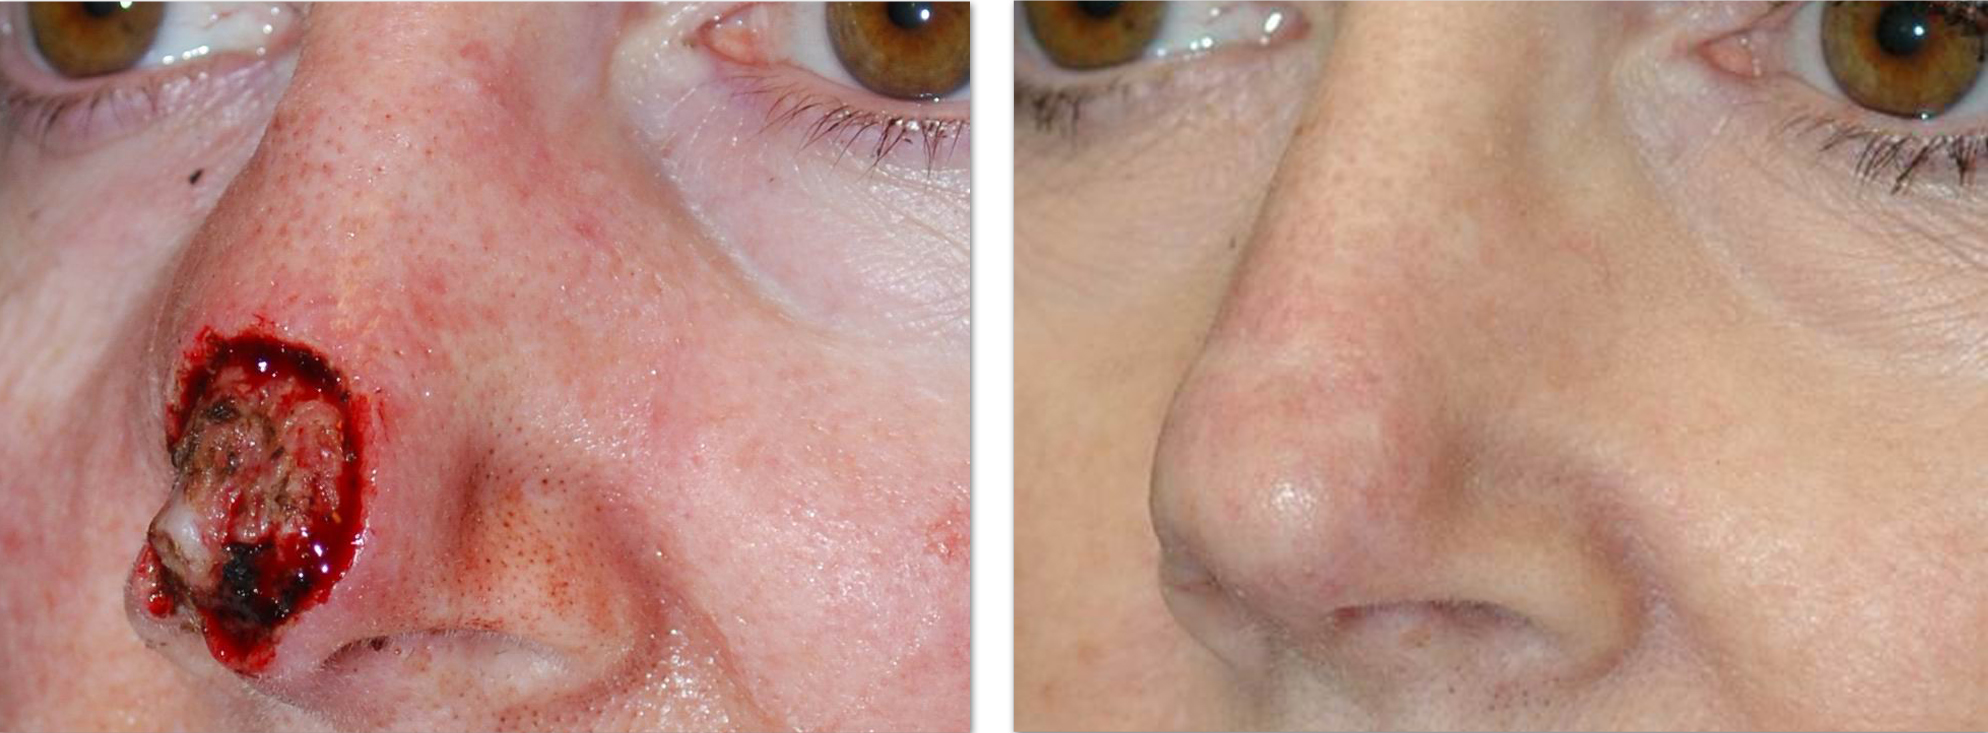 skin cancer on nose pictures